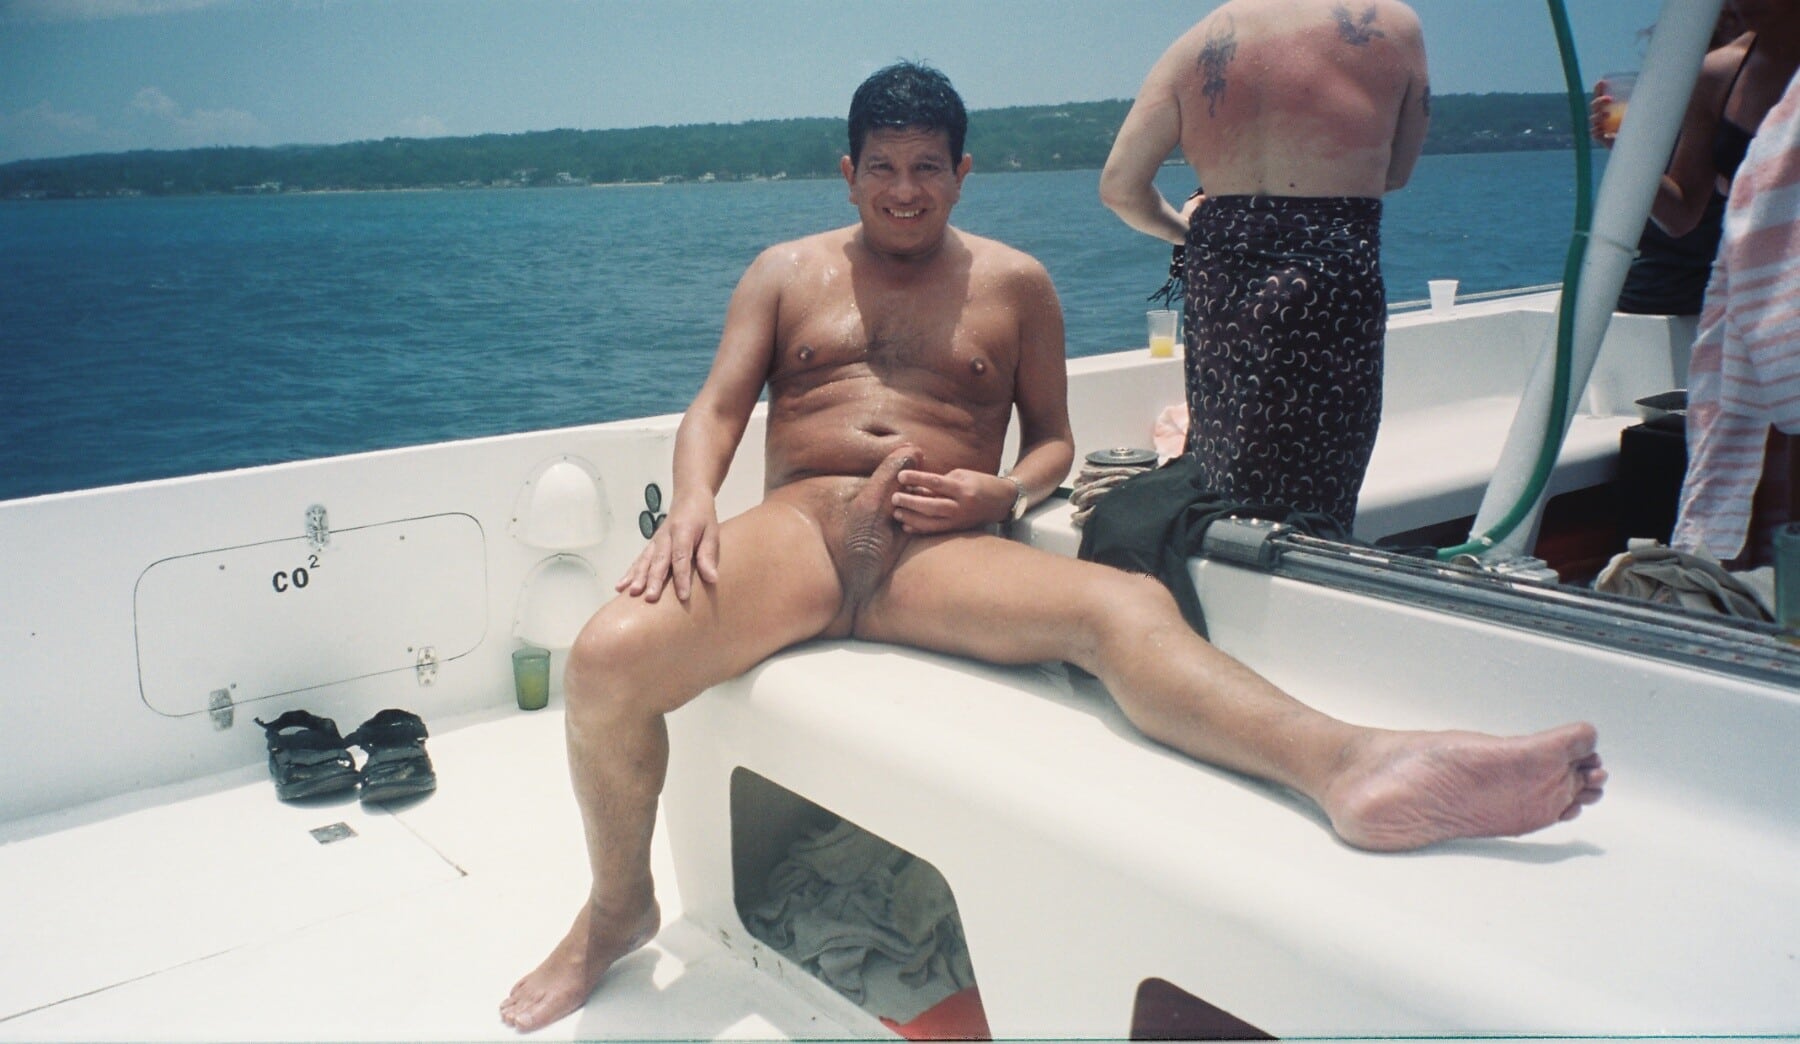 Fun on party boat Dick Flash Pics, Real Amateurs from Google, Tumblr,  Pinterest, Facebook, Twitter, Instagram and Snapchat.